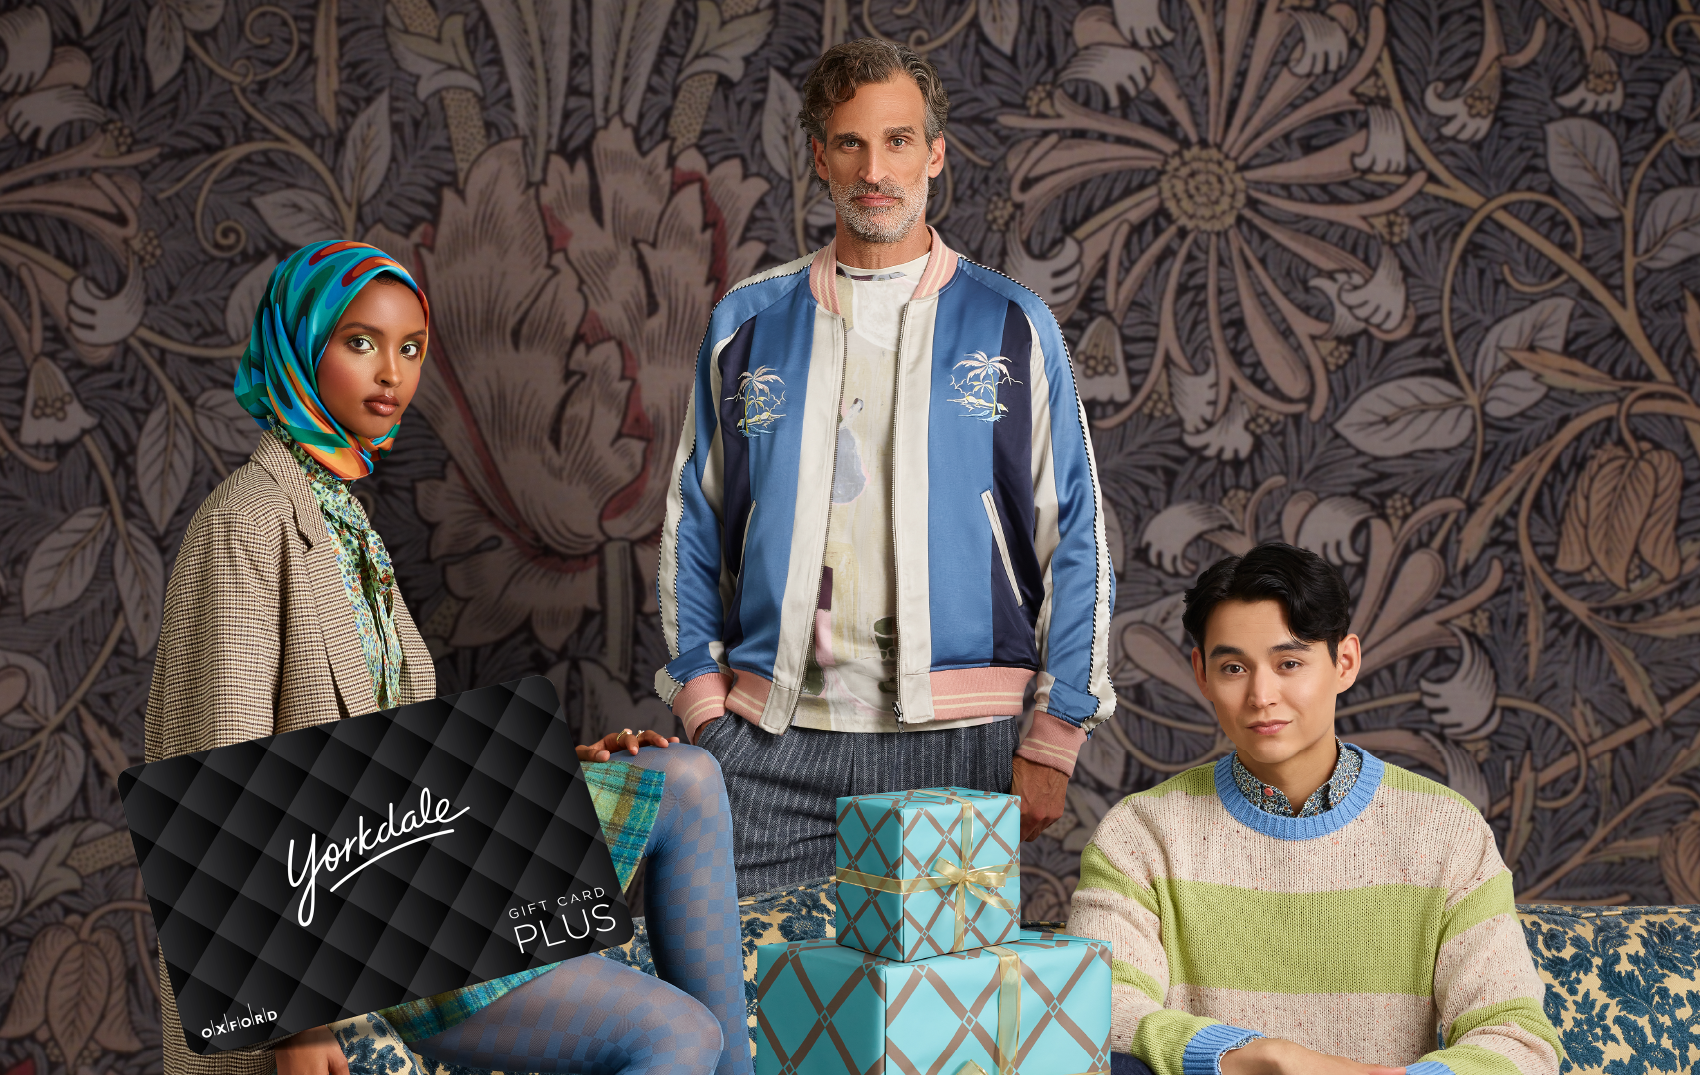 promotional image for a yorkdale gift card featuring three individuals posing against a printed backdrop